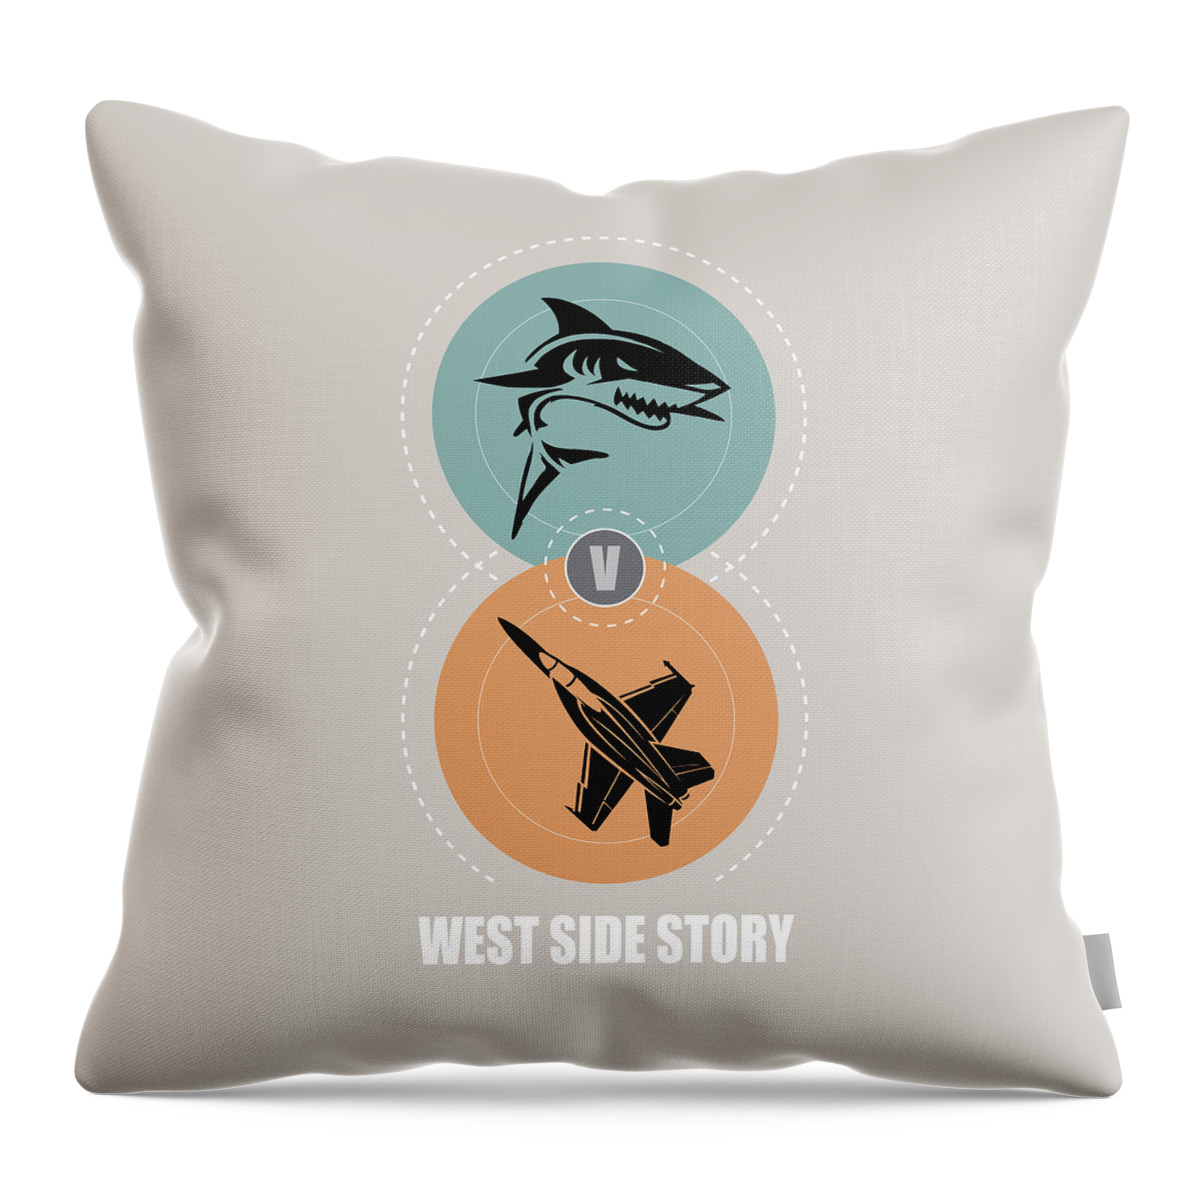 West Side Story Throw Pillow featuring the digital art West Side Story - Alternative Movie Poster by Movie Poster Boy